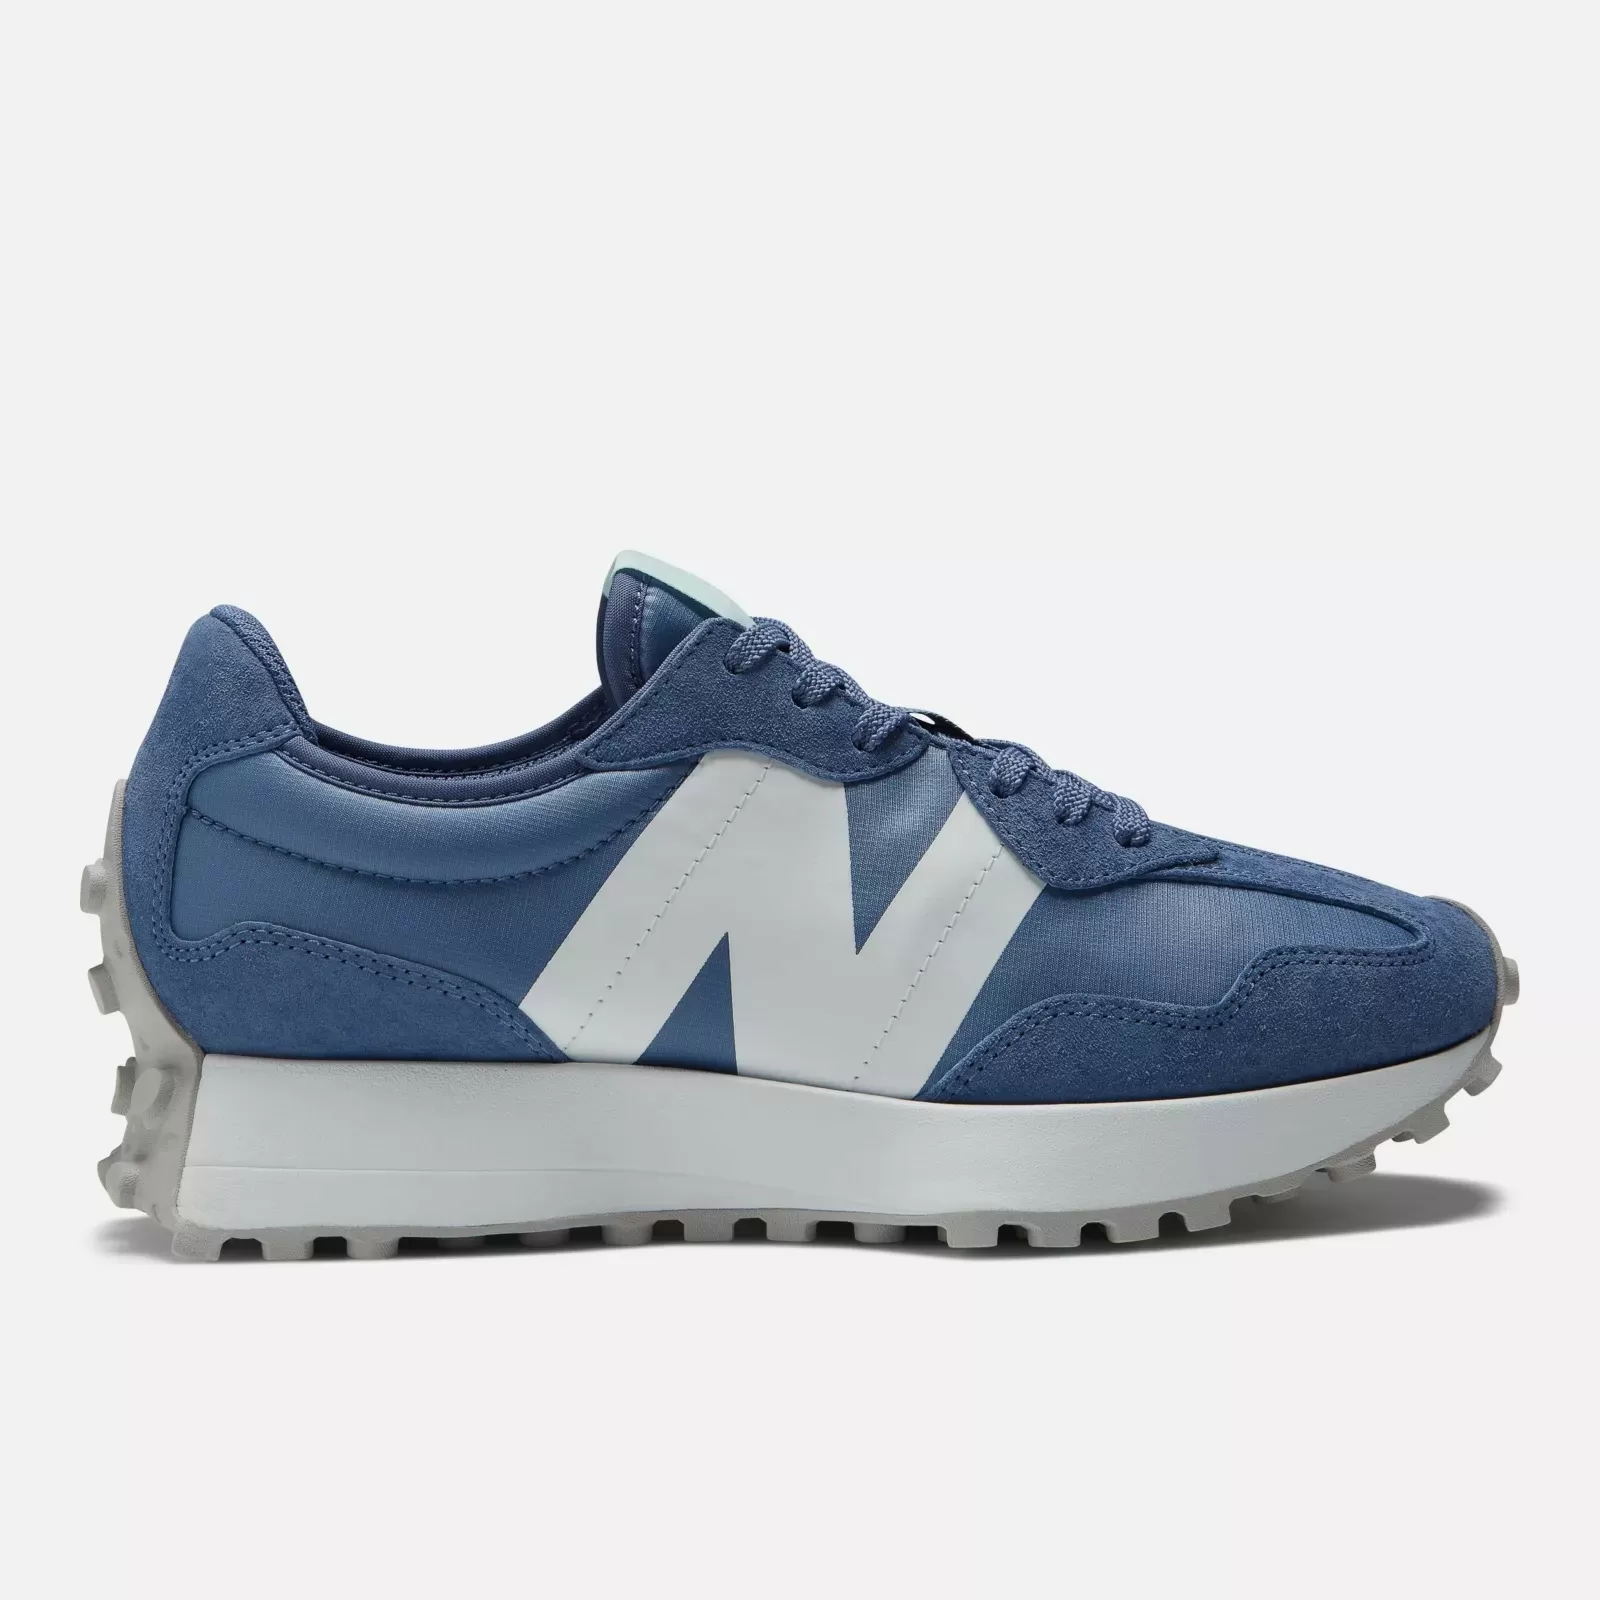 Shop the latest hues of the New Balance 327 herren collection